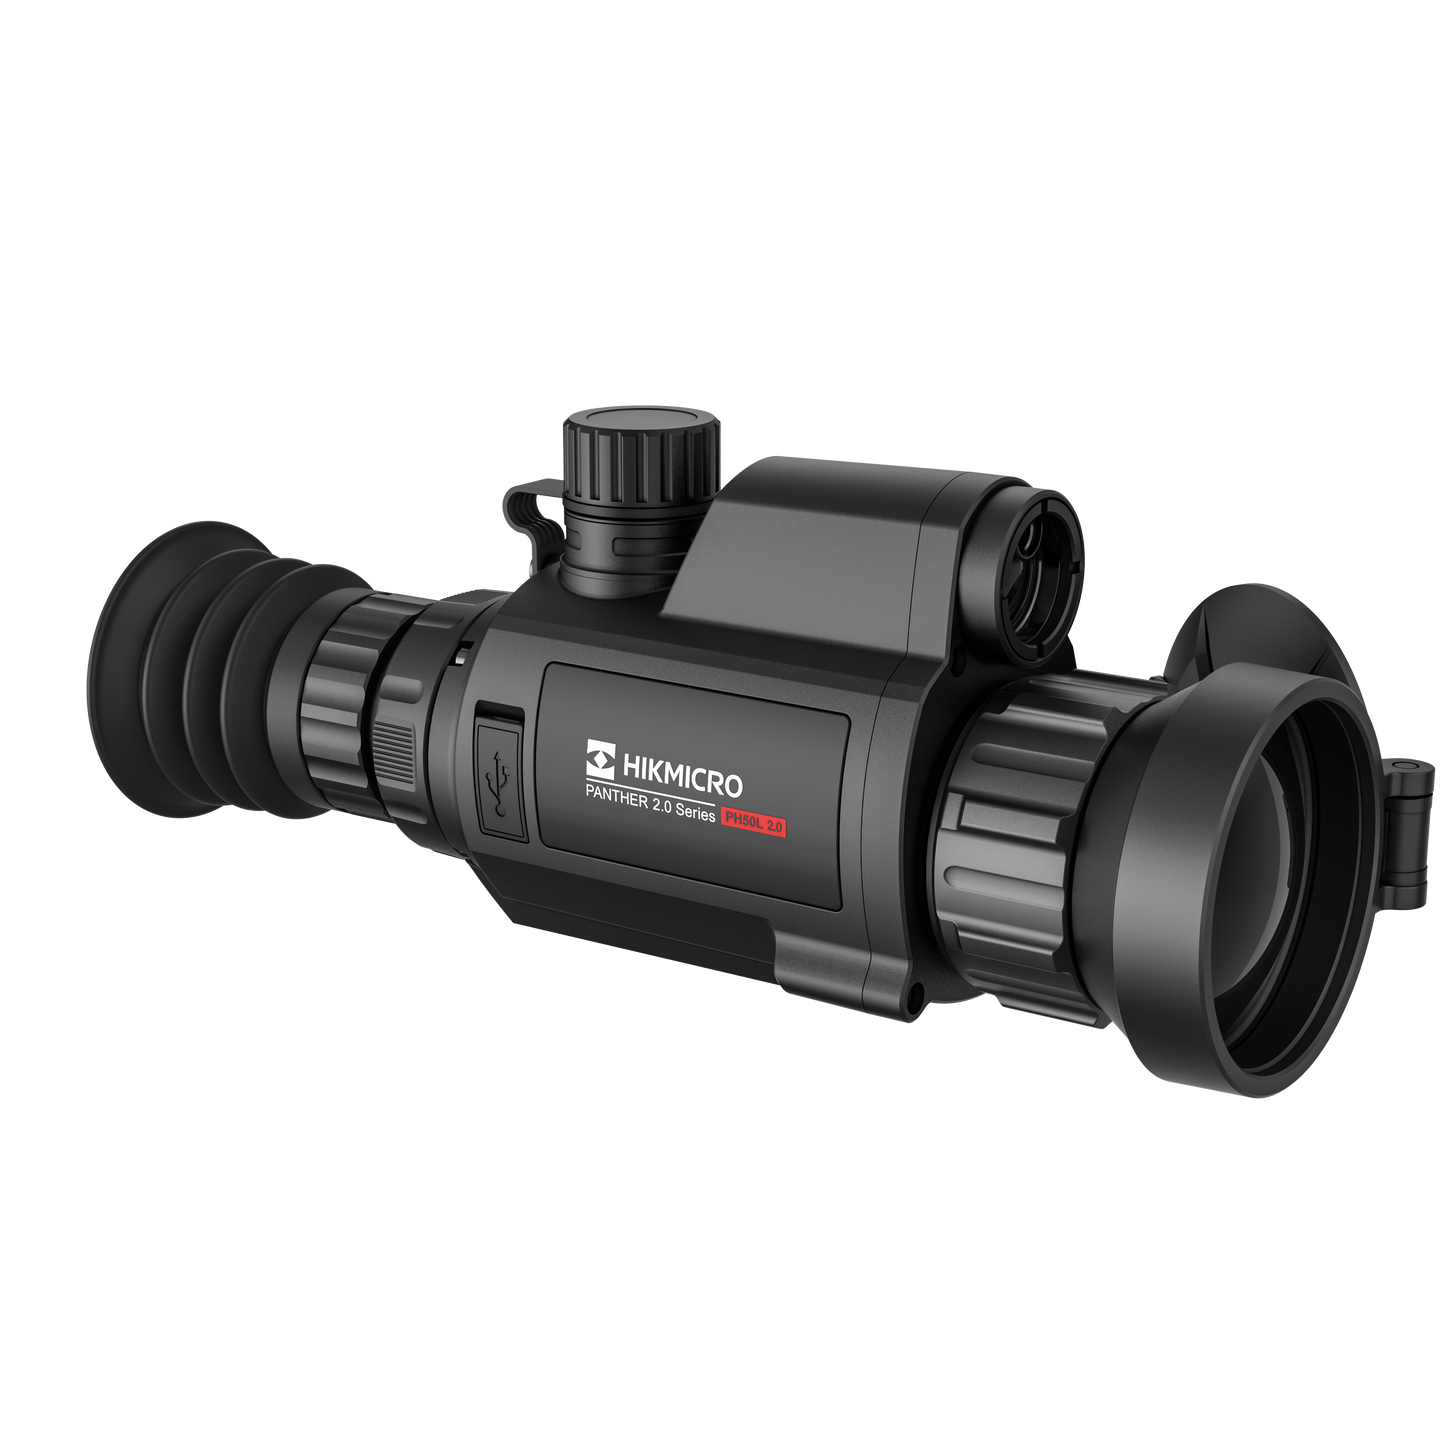 Hikmicro Panther 2.0 PQ35L Thermal Scope